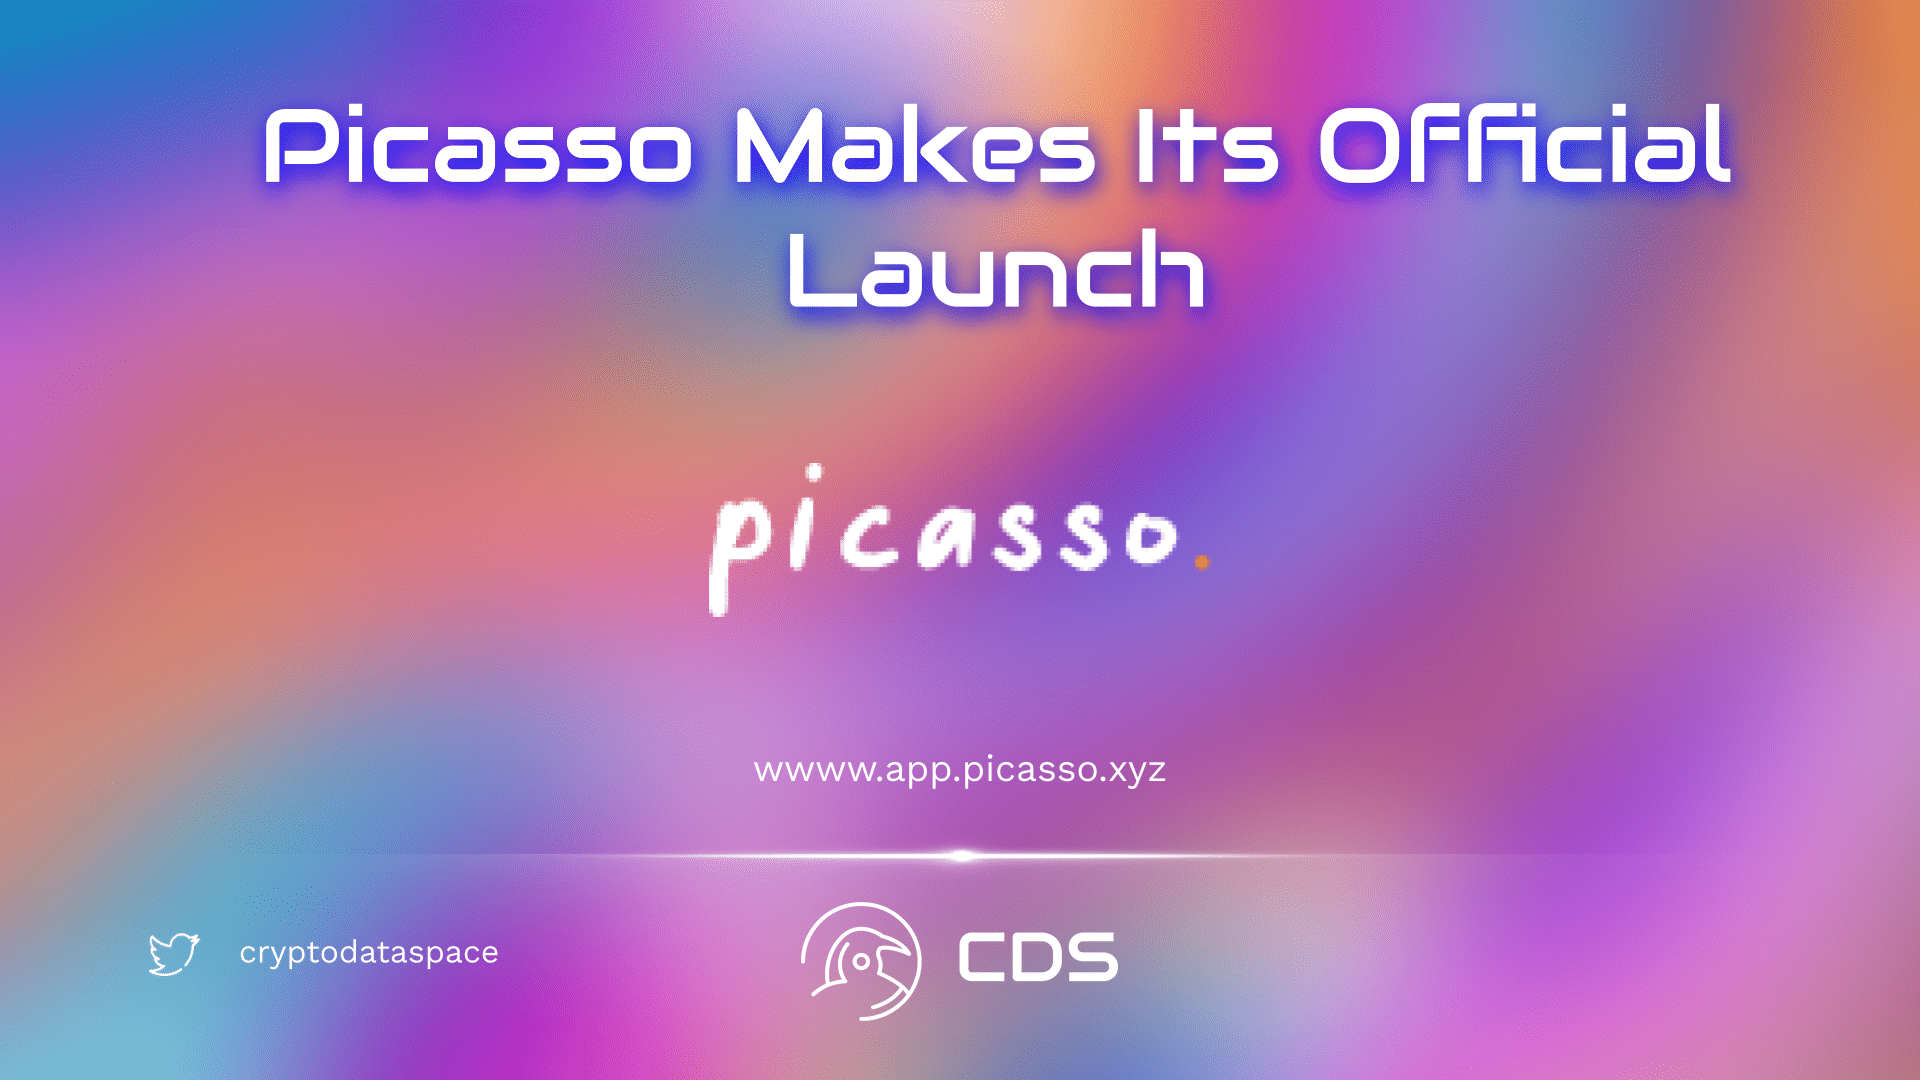 Picasso Makes Its Official Launch